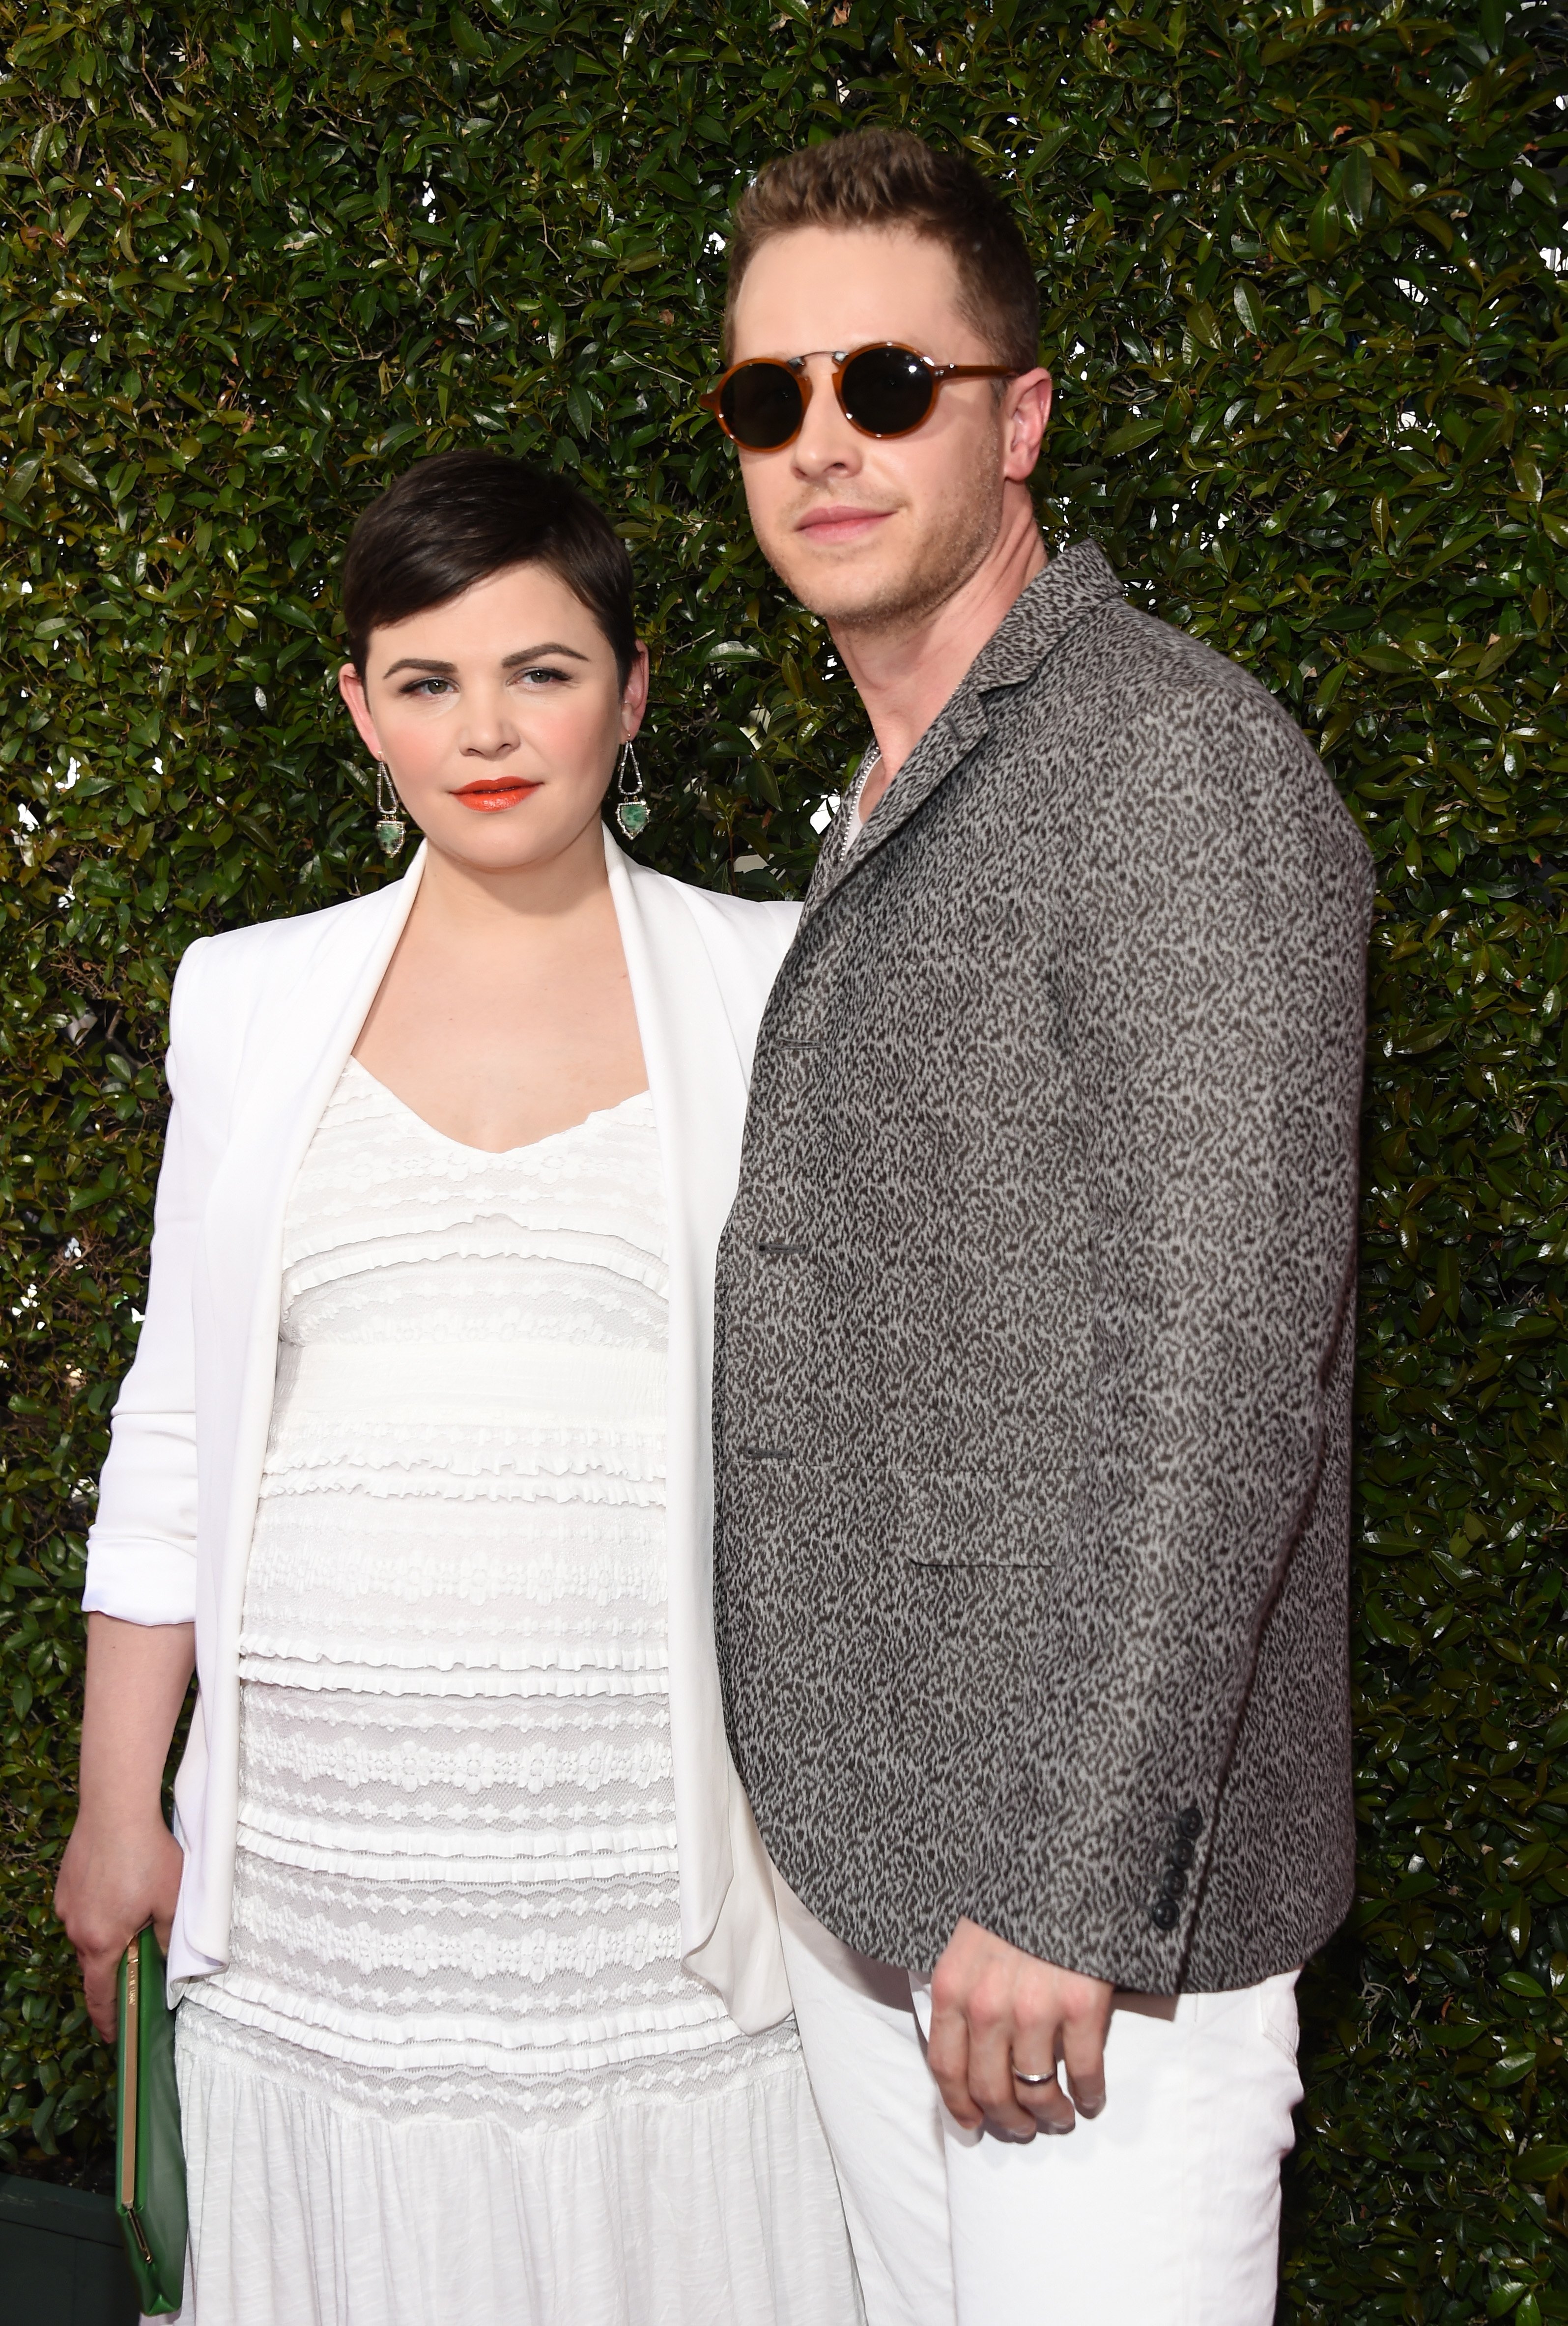 Ginnifer Goodwin and Josh Dallas pose on the red carpet at the John Varvatos 13th Annual Stuart House Benefit presented by Chrysler with kids' tent by Hasbro Studios on April 17, 2016, in Los Angeles | Source: Getty Images